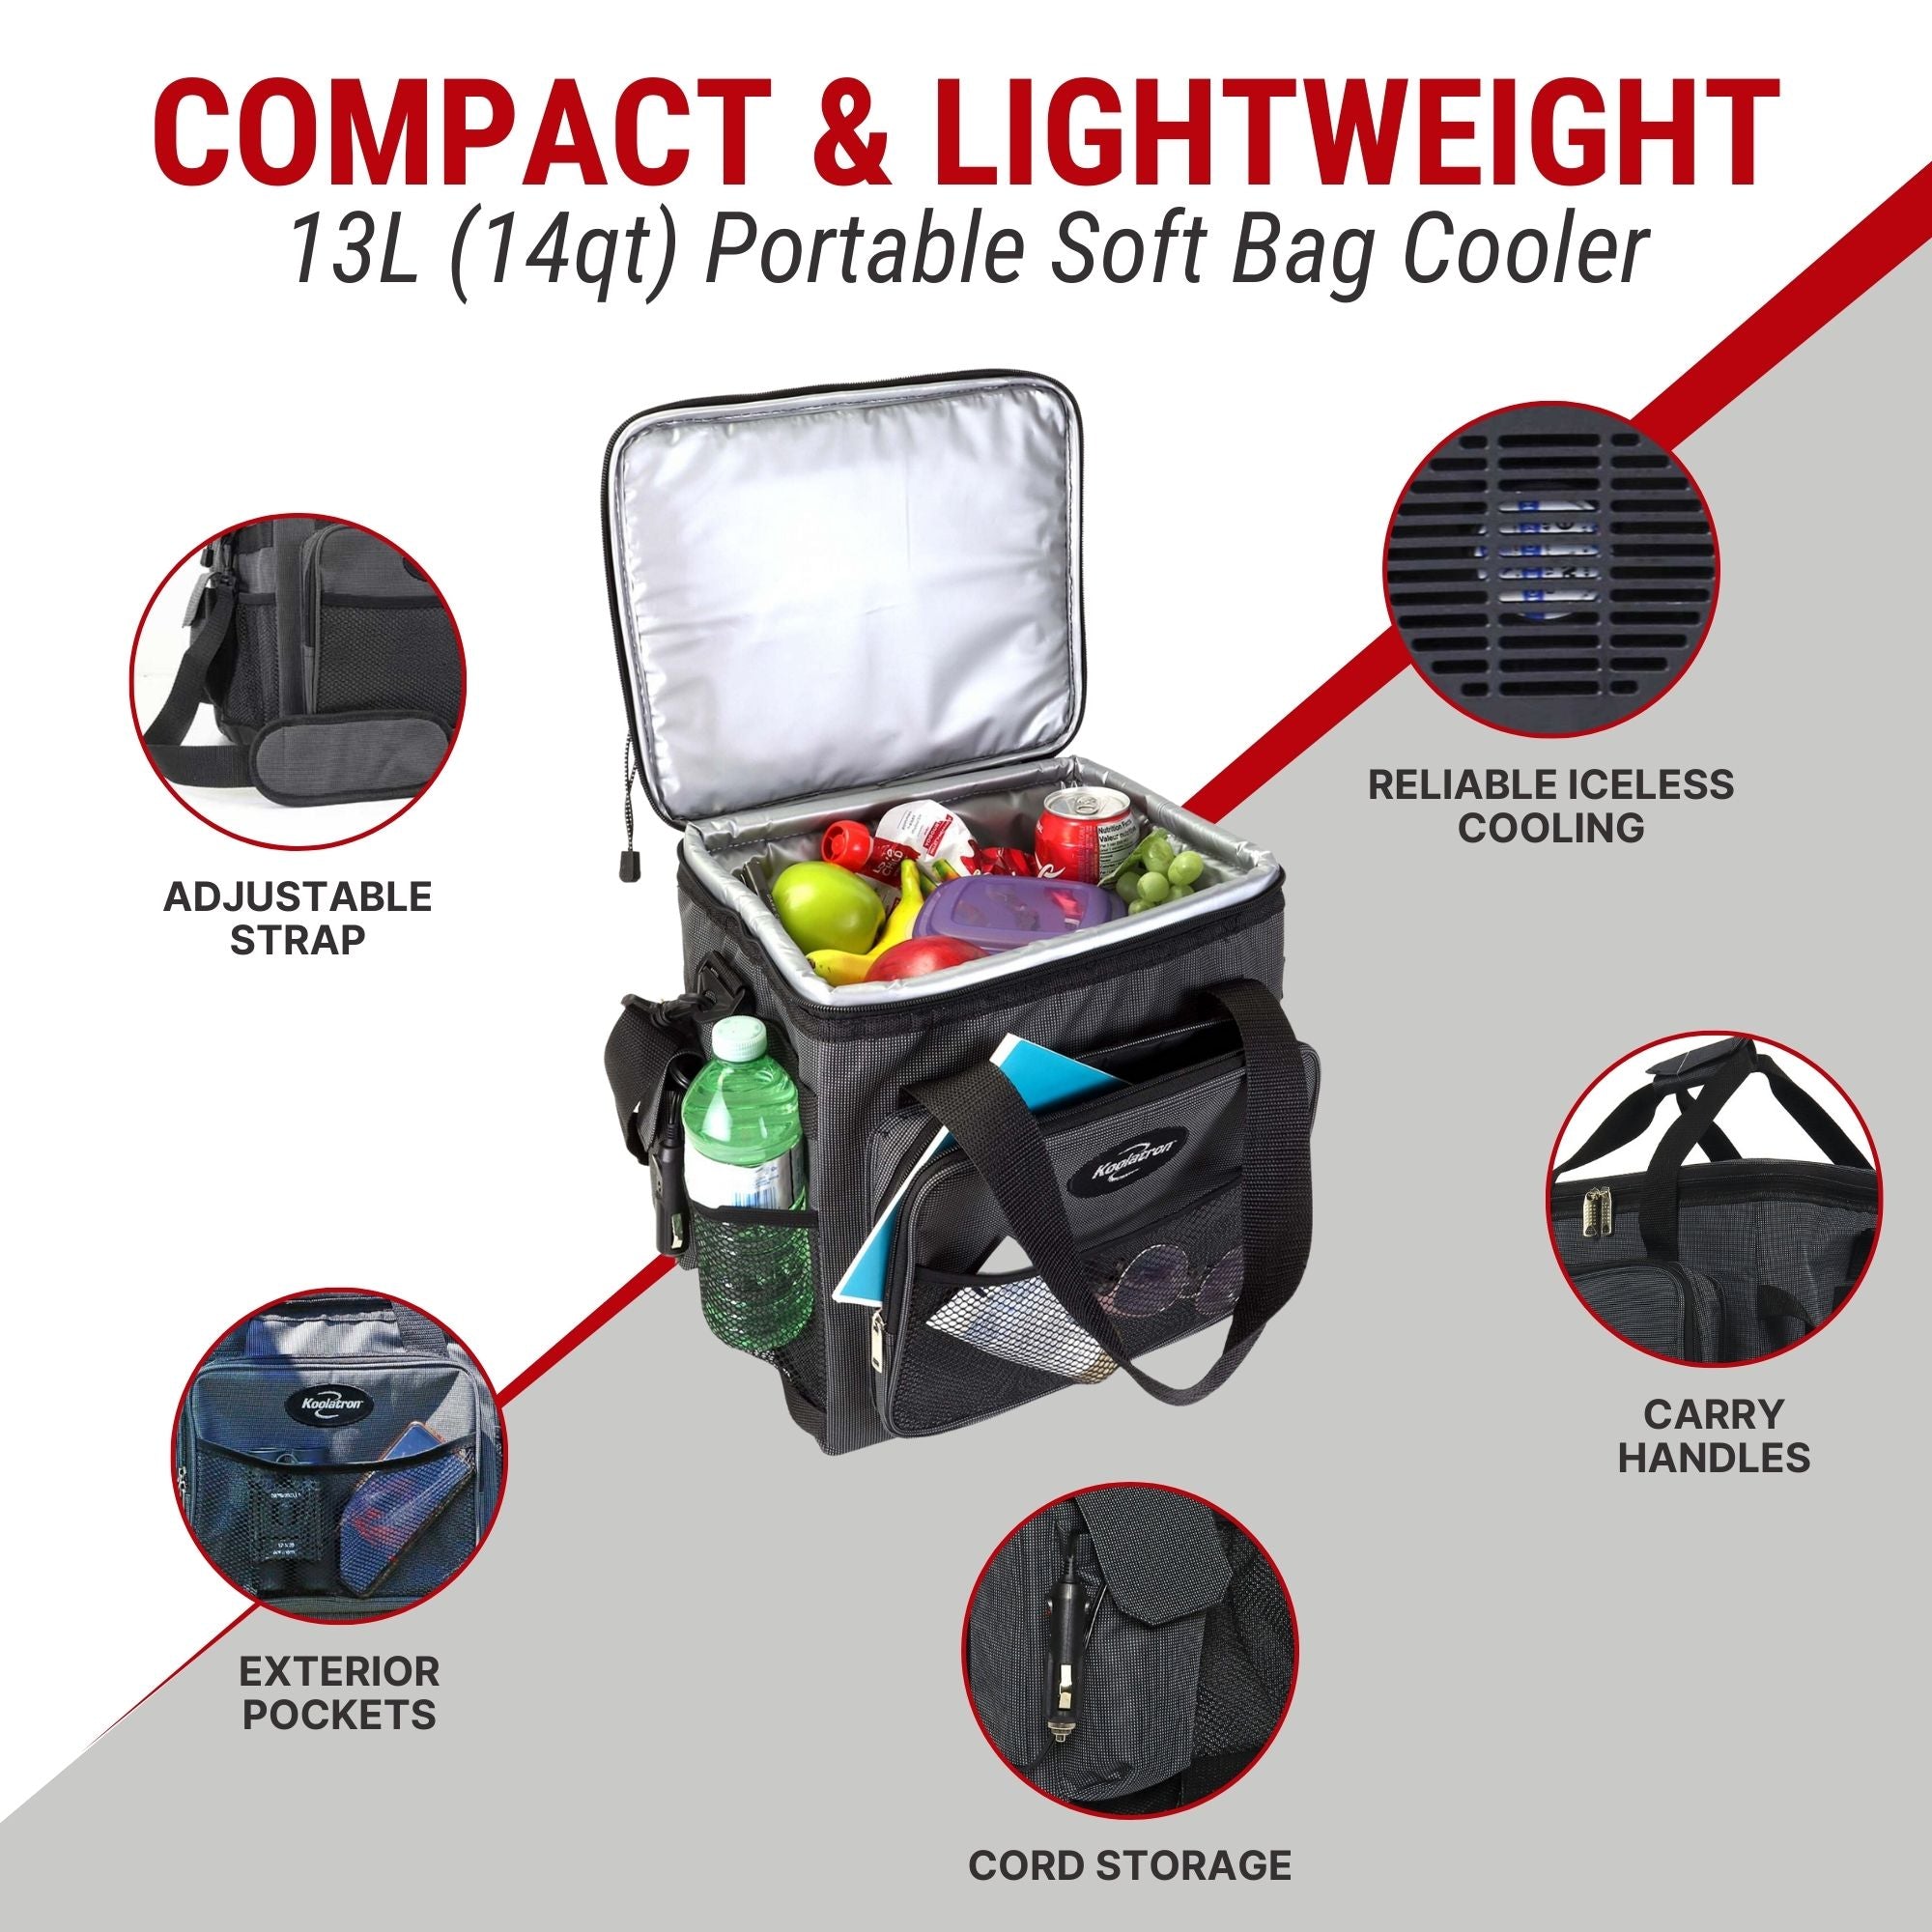 Koolatron 12V cooler open with food inside surrounded by closeup images of features, labeled: Adjustable strap; exterior pockets; cord storage; carry handles; reliable iceless cooling. Text above reads, "COMPACT & LIGHTWEIGHT 13L (14 qt) portable soft bag cooler"